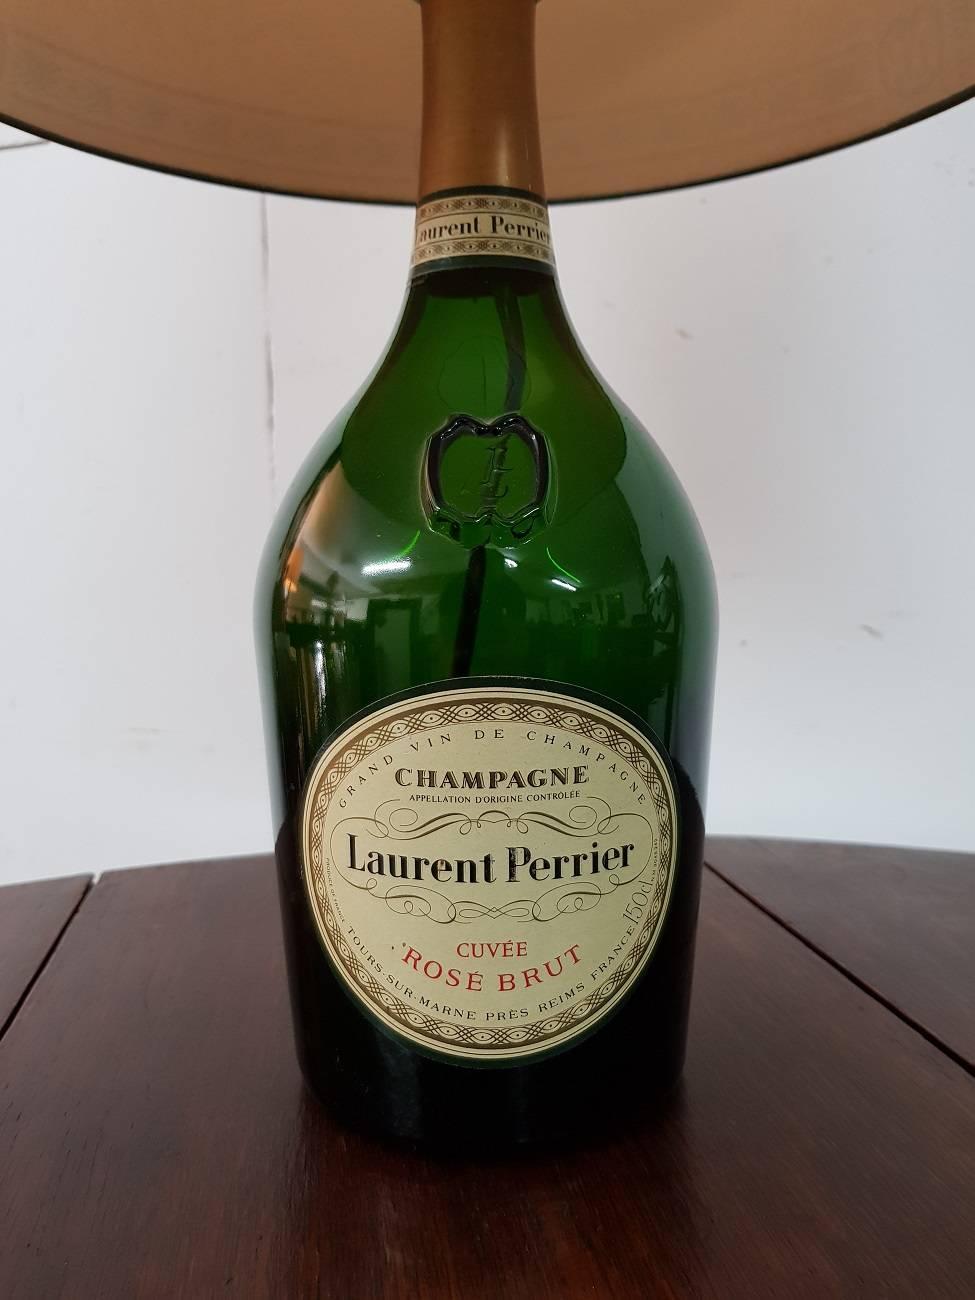 Vintage Champagne bottle table lamp of Laurent Perrier from the 20th century.

The measurements are,
Depth 40 cm/ 15.7 inch.
Width 40 cm/ 15.7 inch.
Height 58 cm/ 22.8 inch.
 